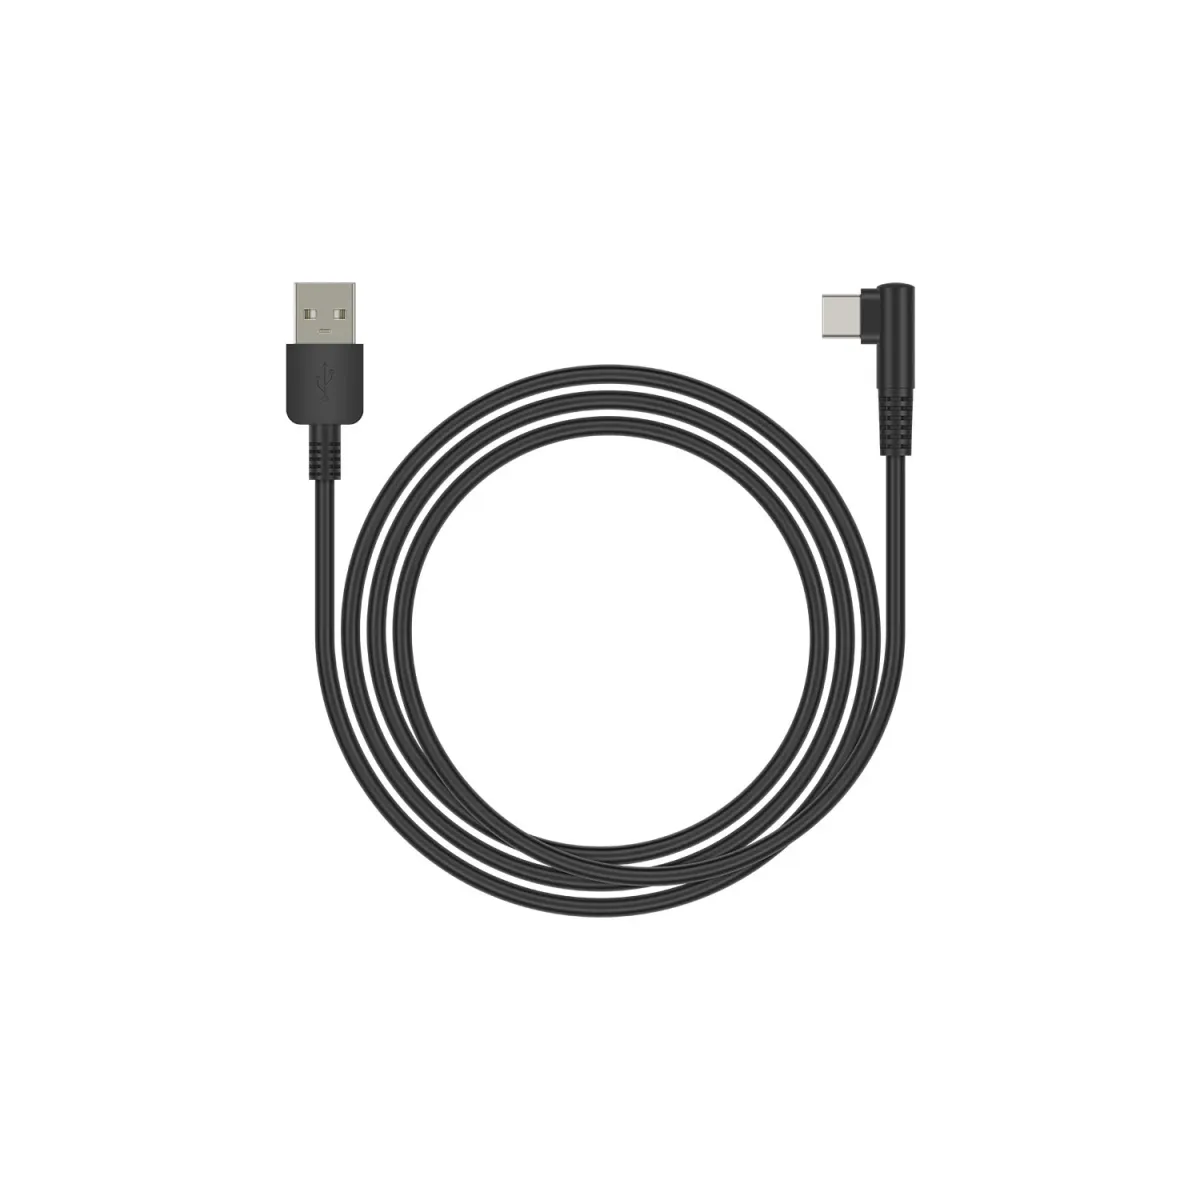 Huion USB-C Cable for Graphic Drawing Tablet  Huion Official Store:  Drawing Tablets, Pen Tablets, Pen Display, Led Light Pad